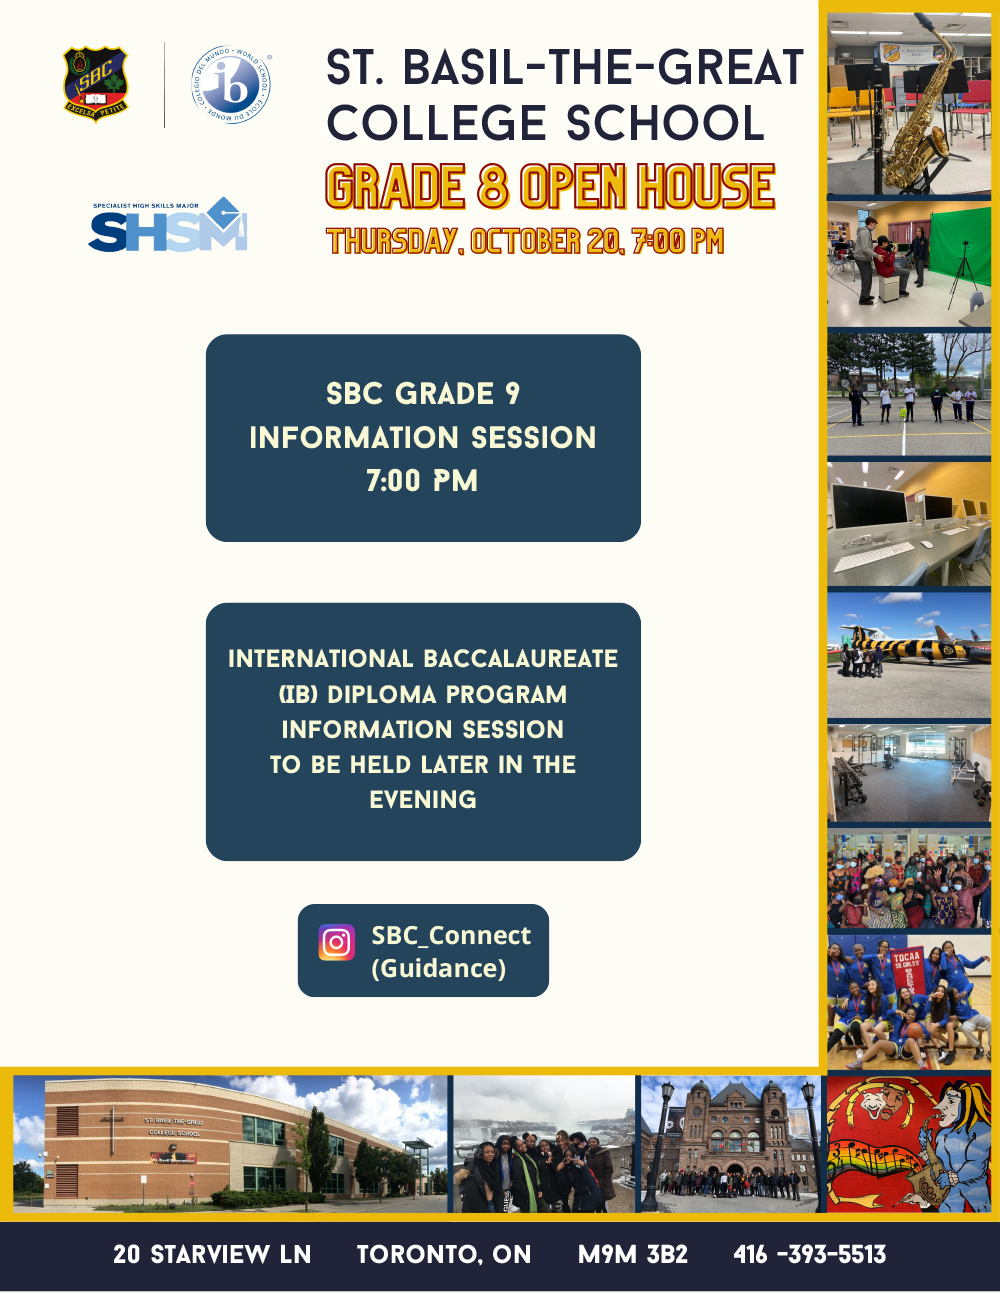 St. Basil-the-Great Open House flyer page 2